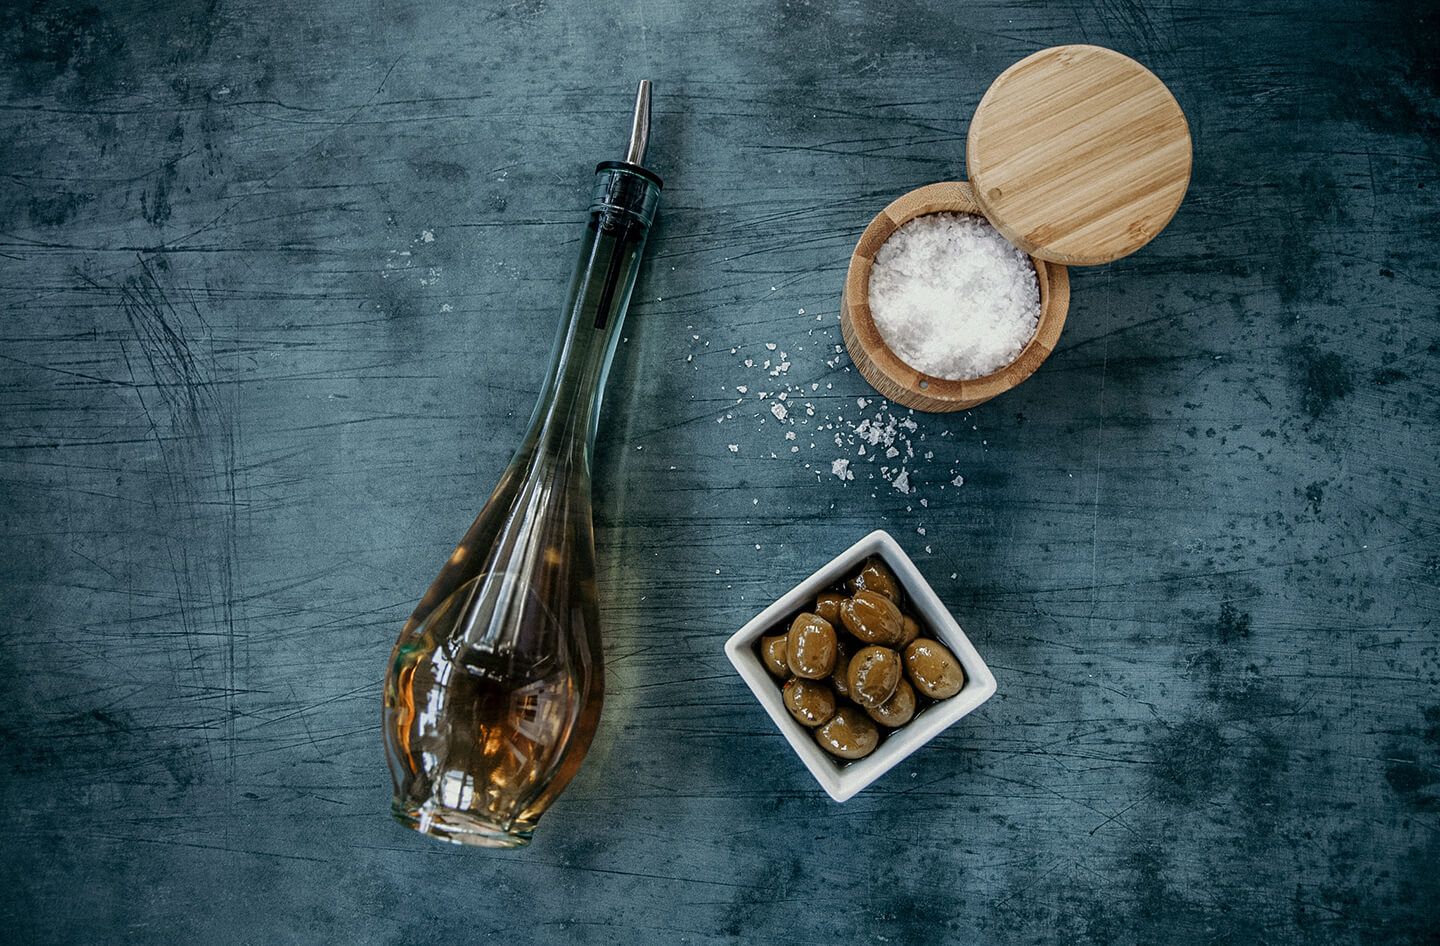 A sleek, skinny bottle of vinegar next to a dish of olives and a wooden container of kosher salt.